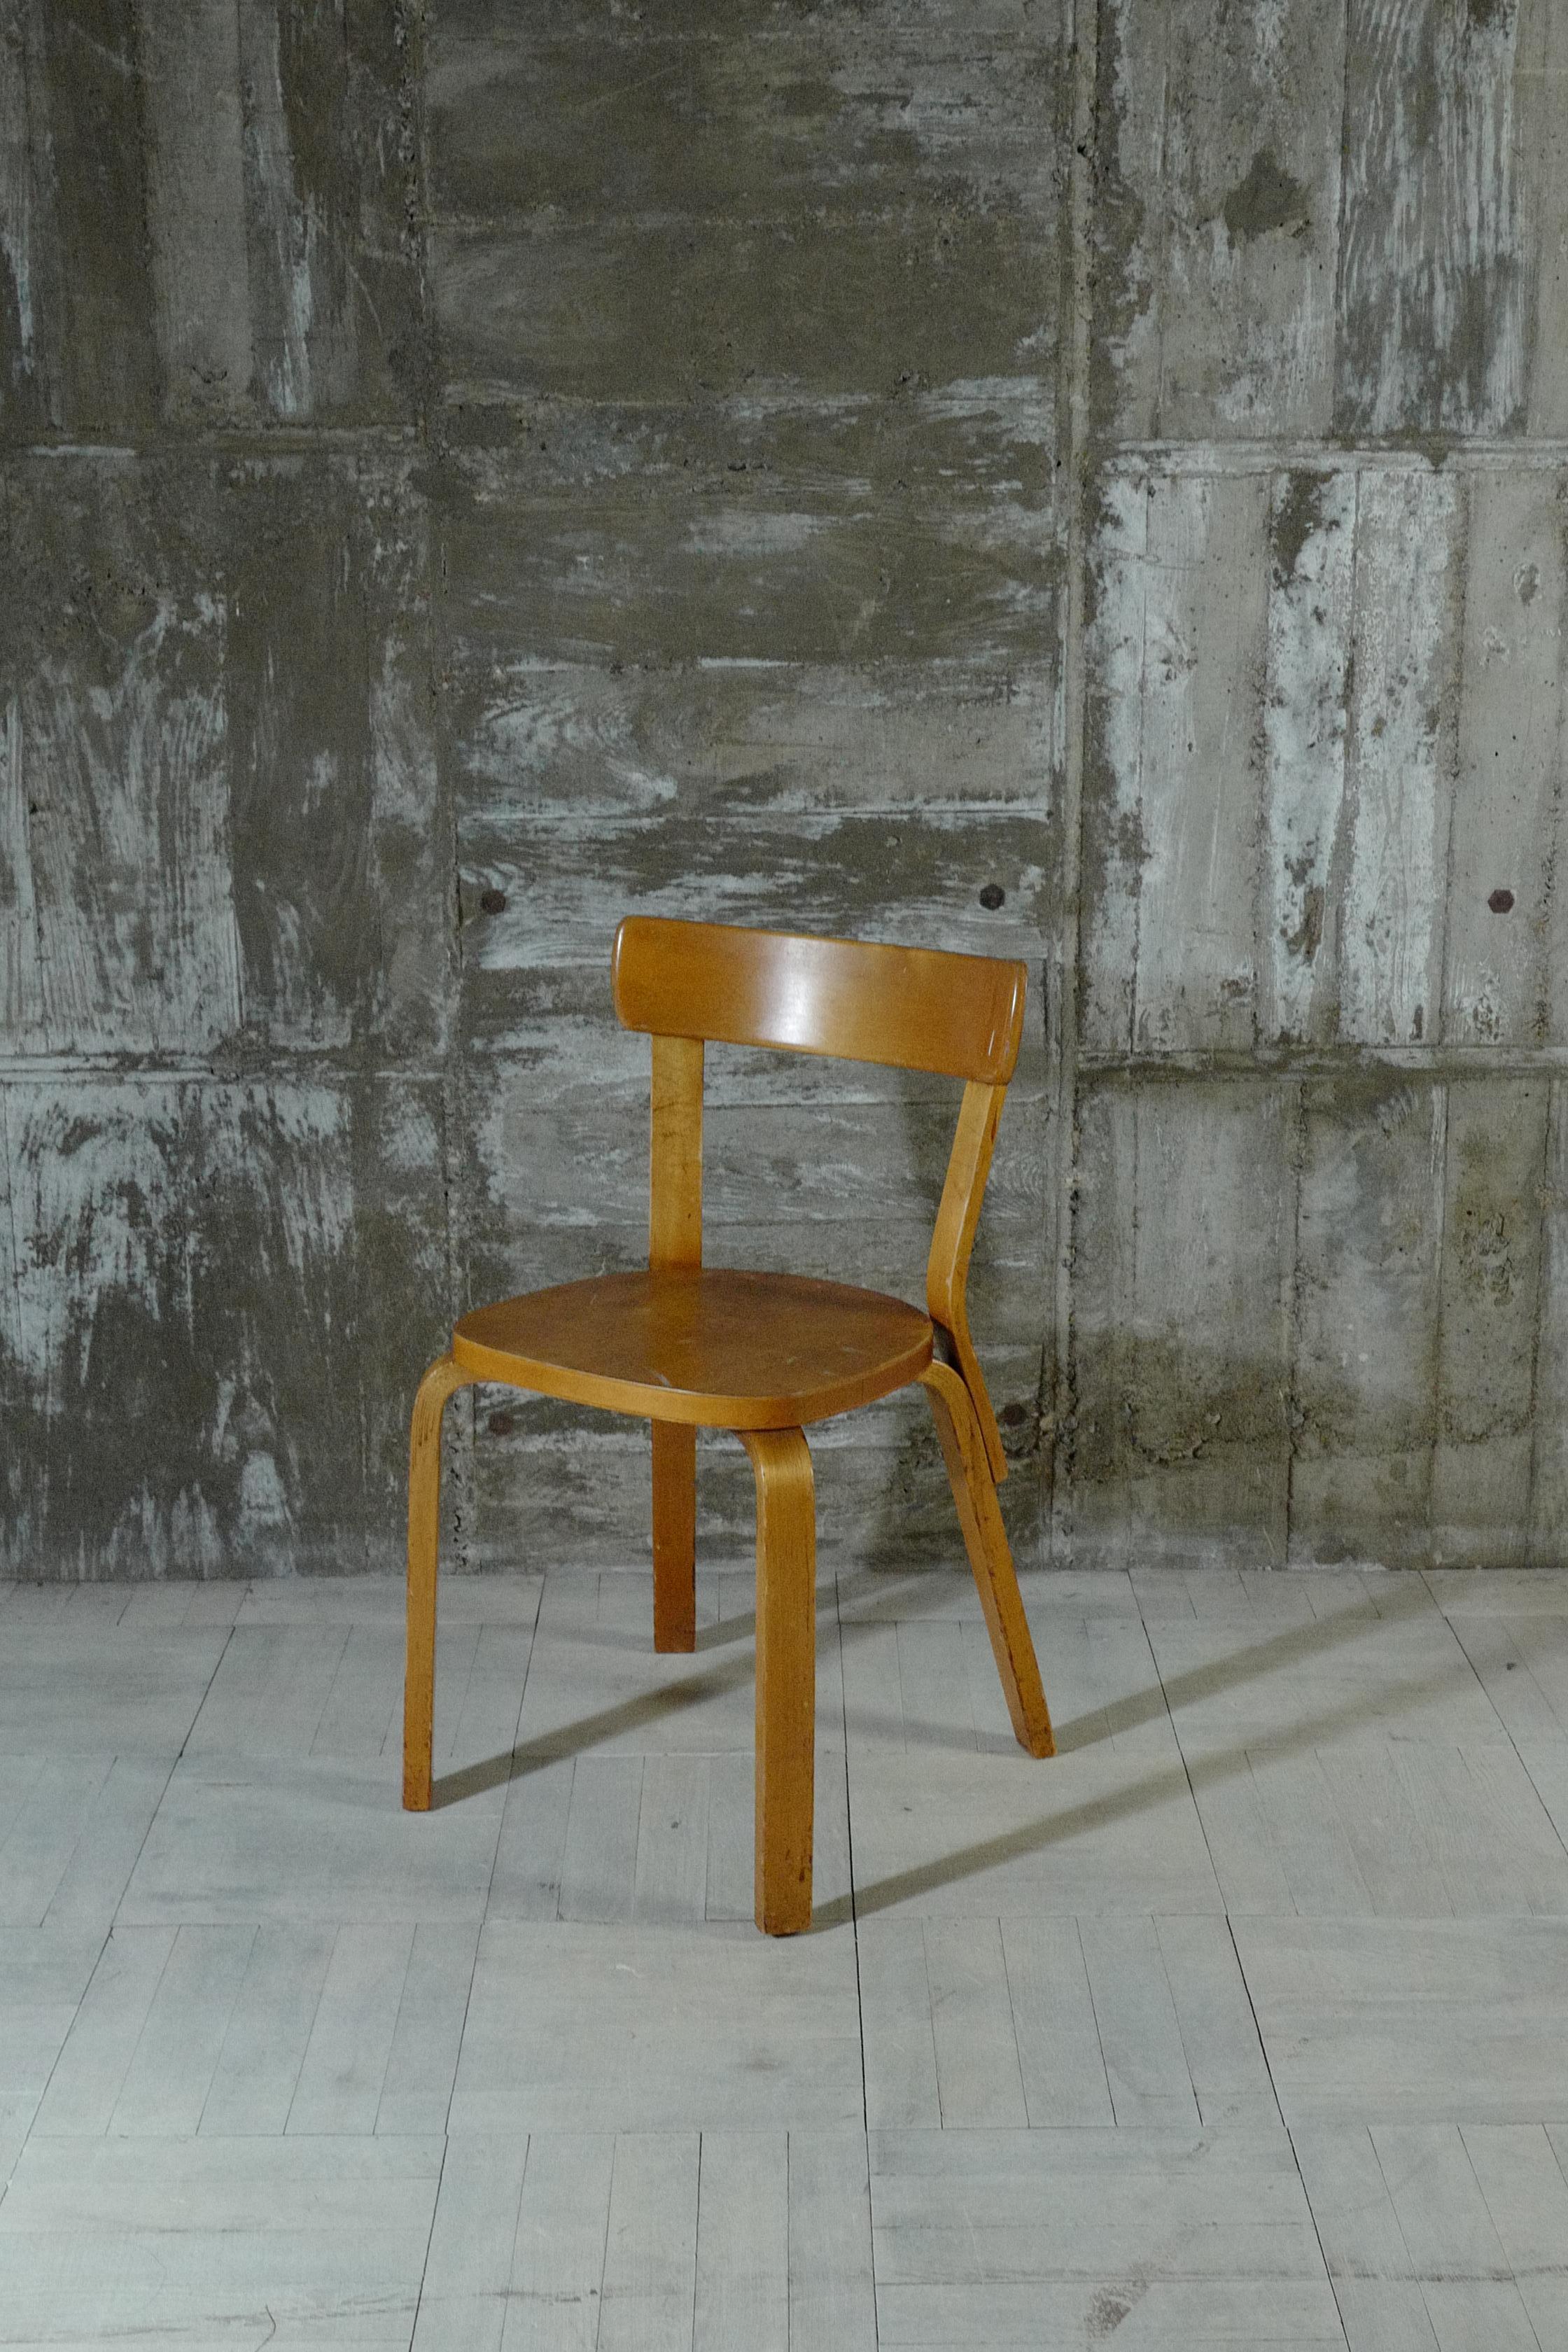 Designed by Alvar Aalto.
This chair 69 was manufactured in the 1940s.
It is from the era when it was manufactured in Hedemora, Sweden.
It has a structure manufactured with hedemora from the 1940s, which is not found in current products.
The paint